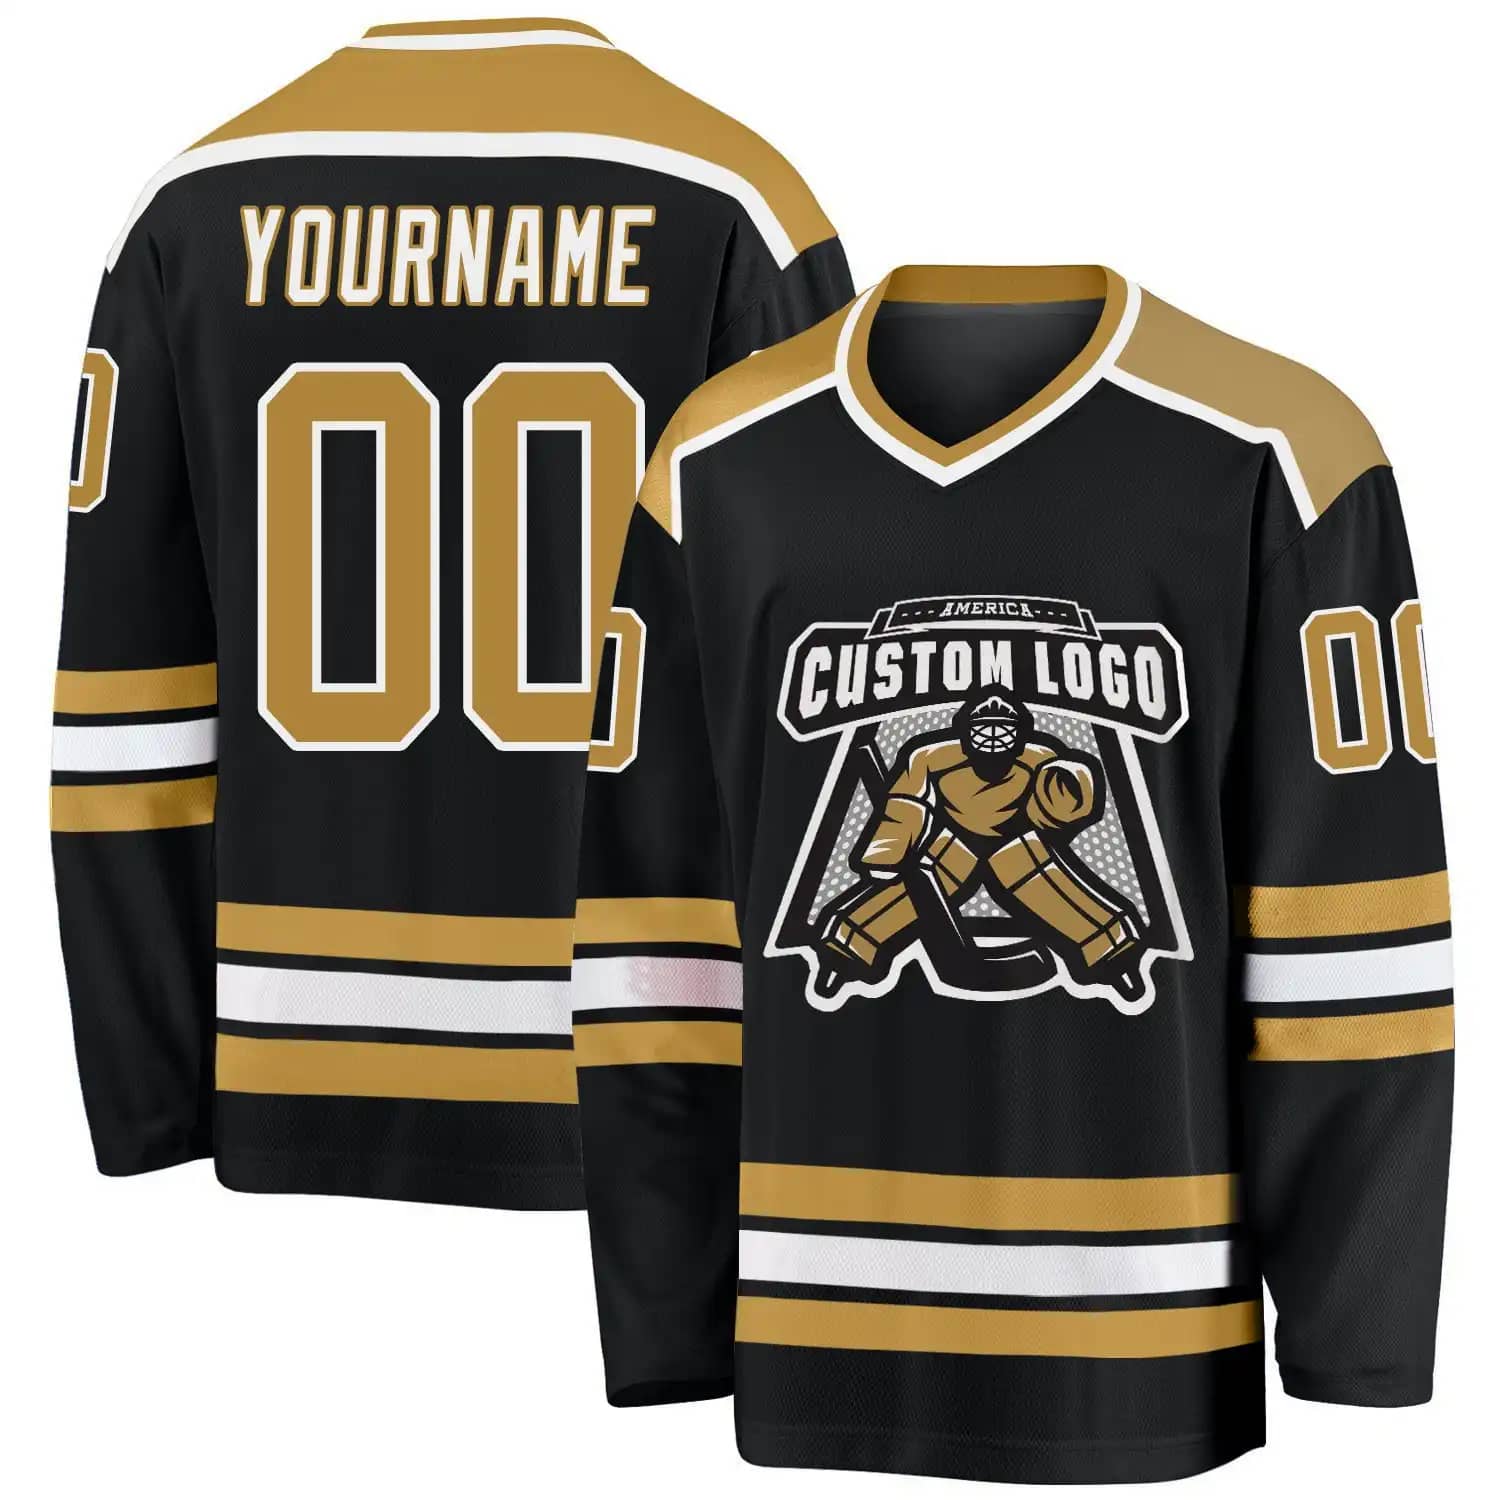 Stitched And Print Black Old Gold-white Hockey Jersey Custom